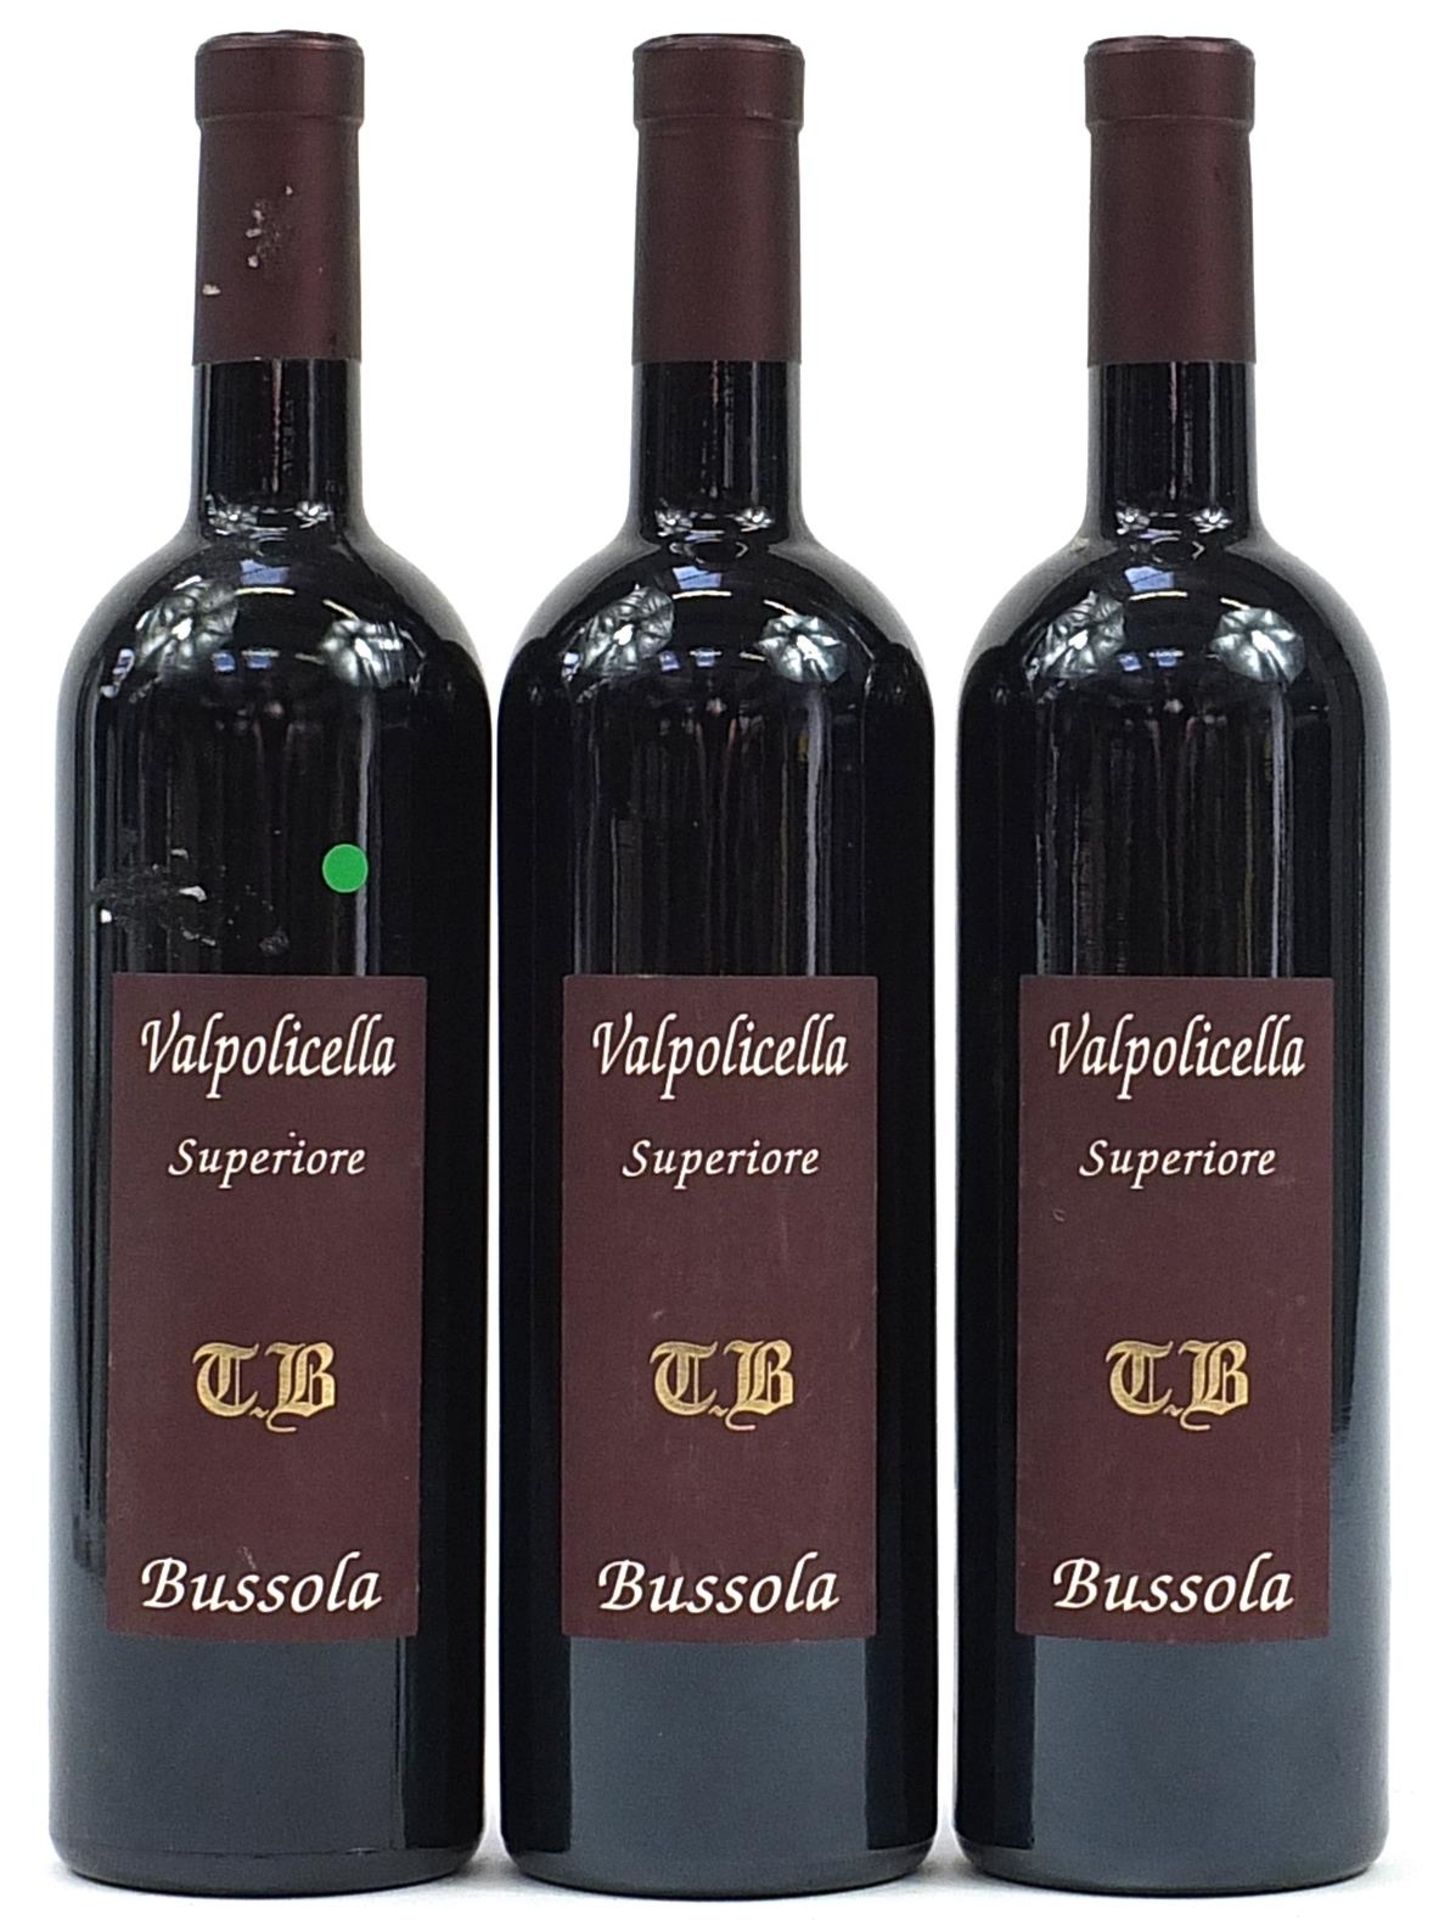 Three bottles of 2003 Valpolicella Superiore Bussola red wine : For further information on this